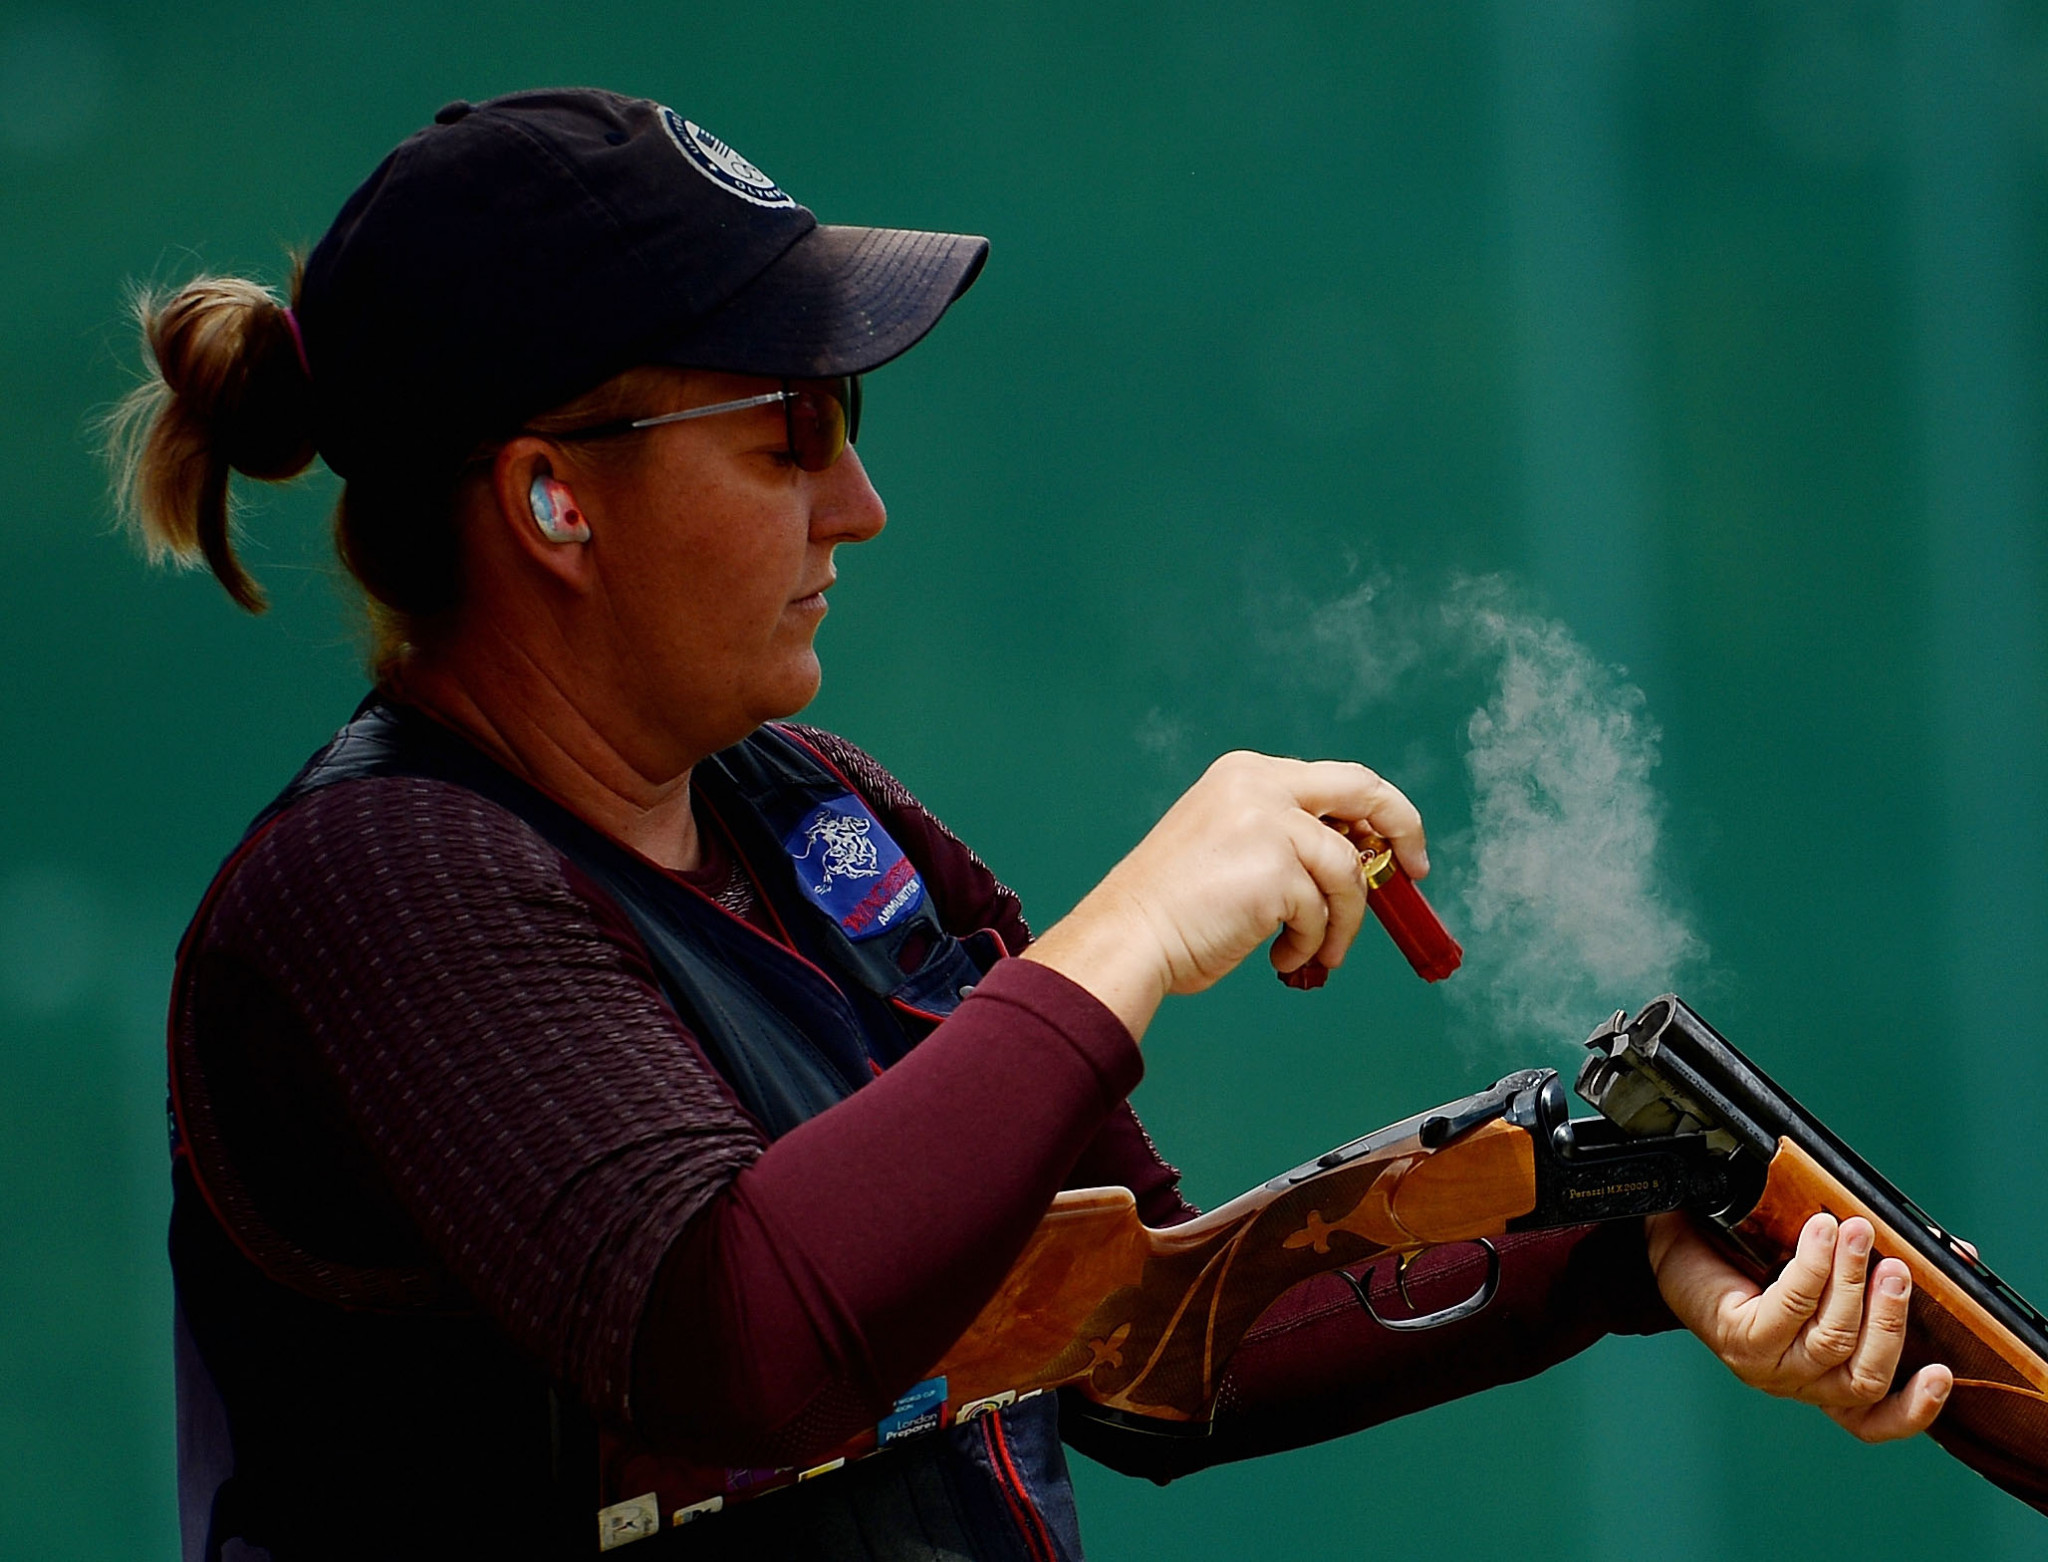 Cool-hand Rhode takes third skeet World Cup gold in Tucson shoot-off